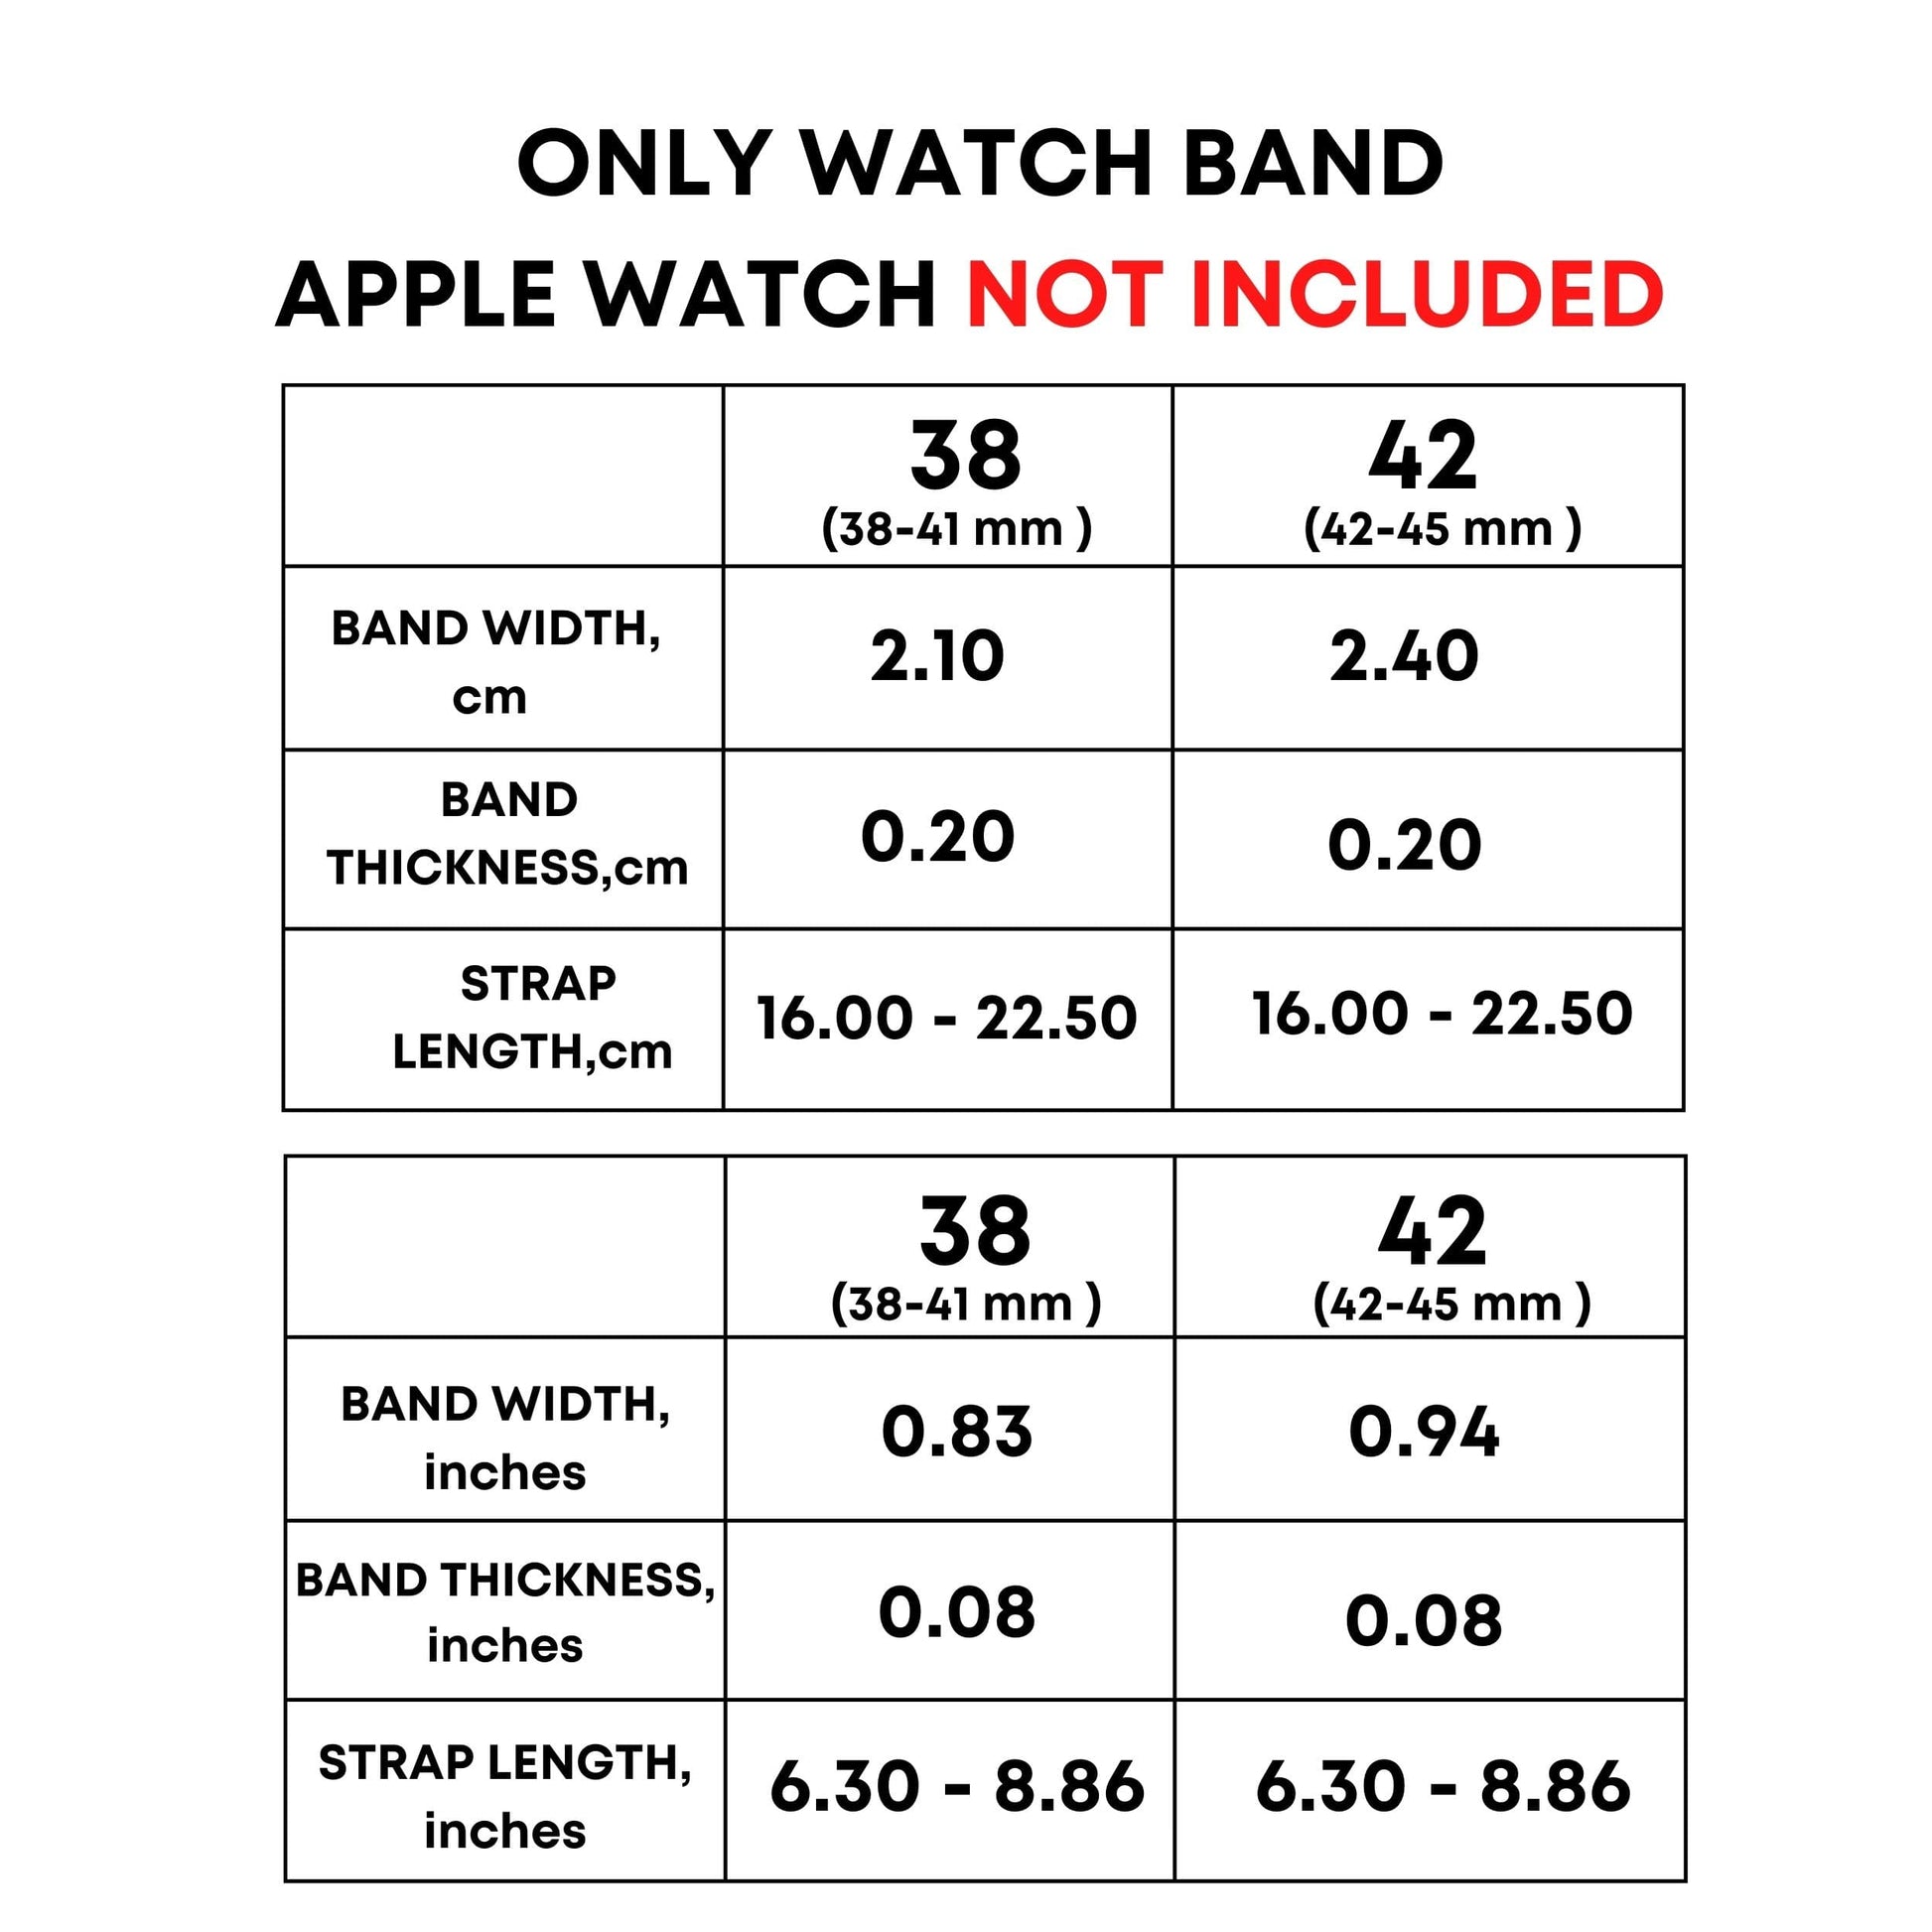 demiboy watch band for Apple iwatch, measurements